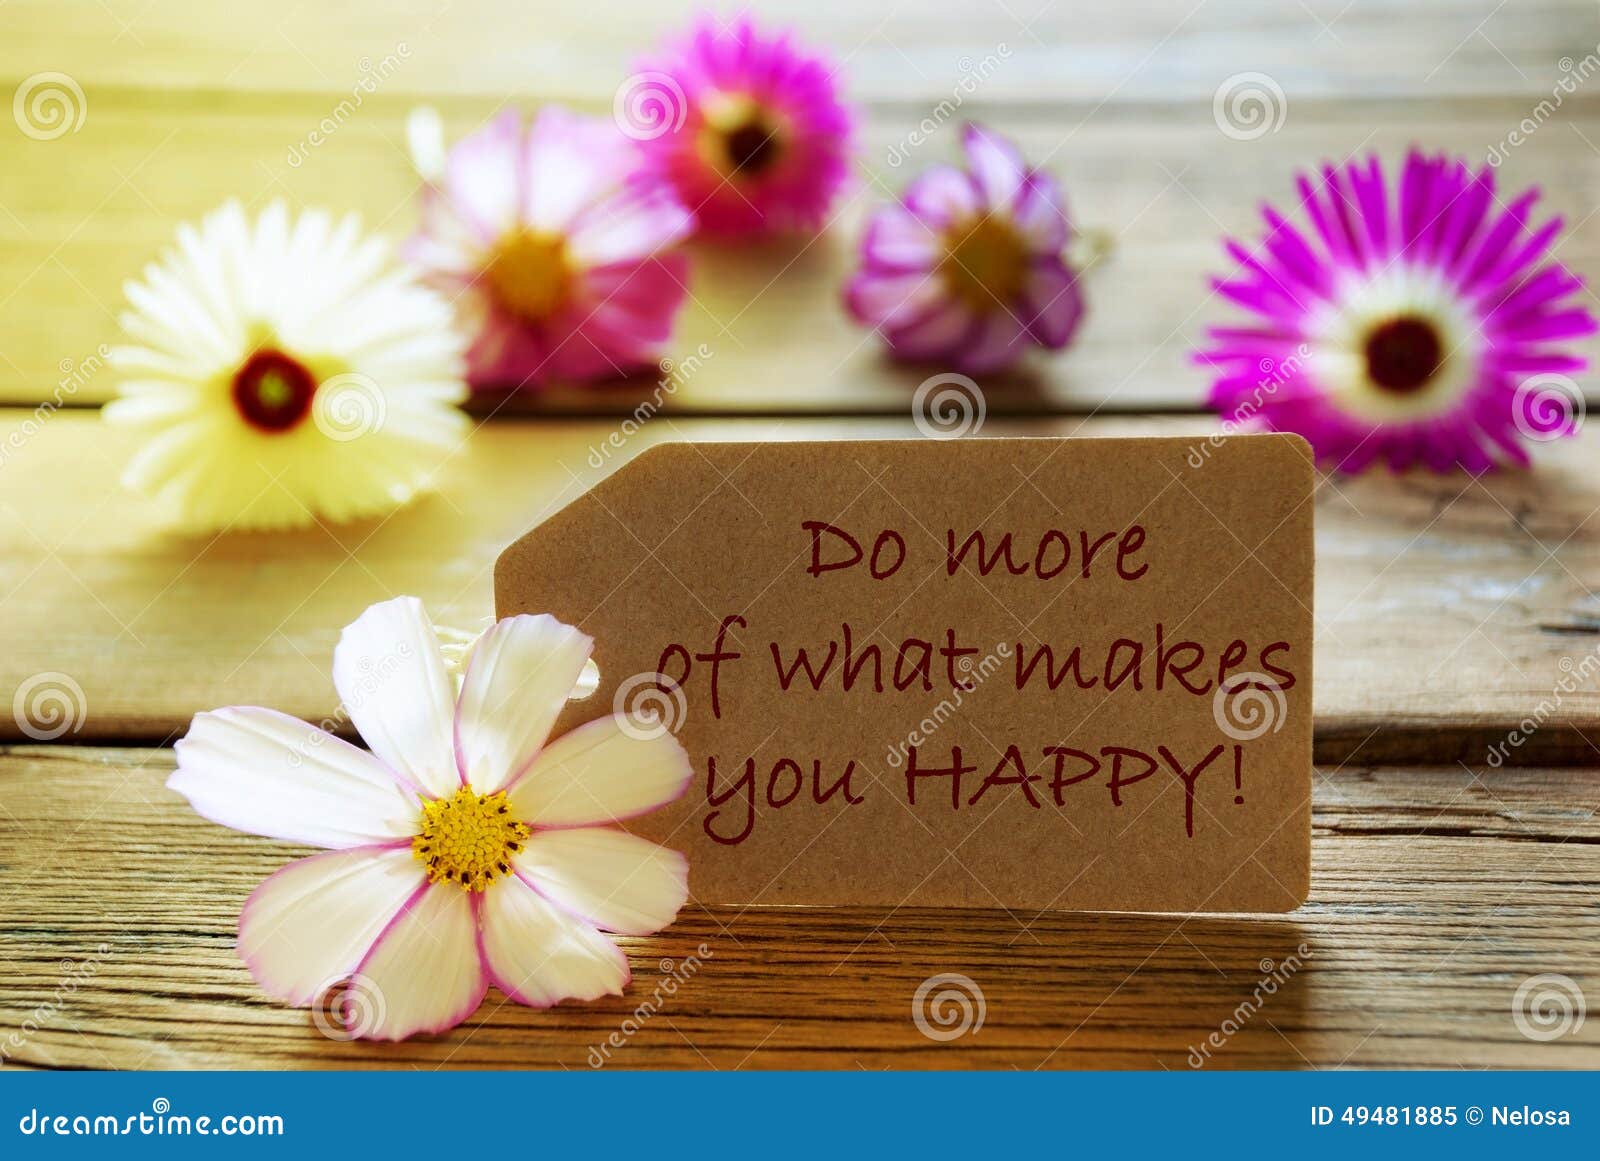 sunny label with life quote do more of what makes you happy with cosmea blossoms